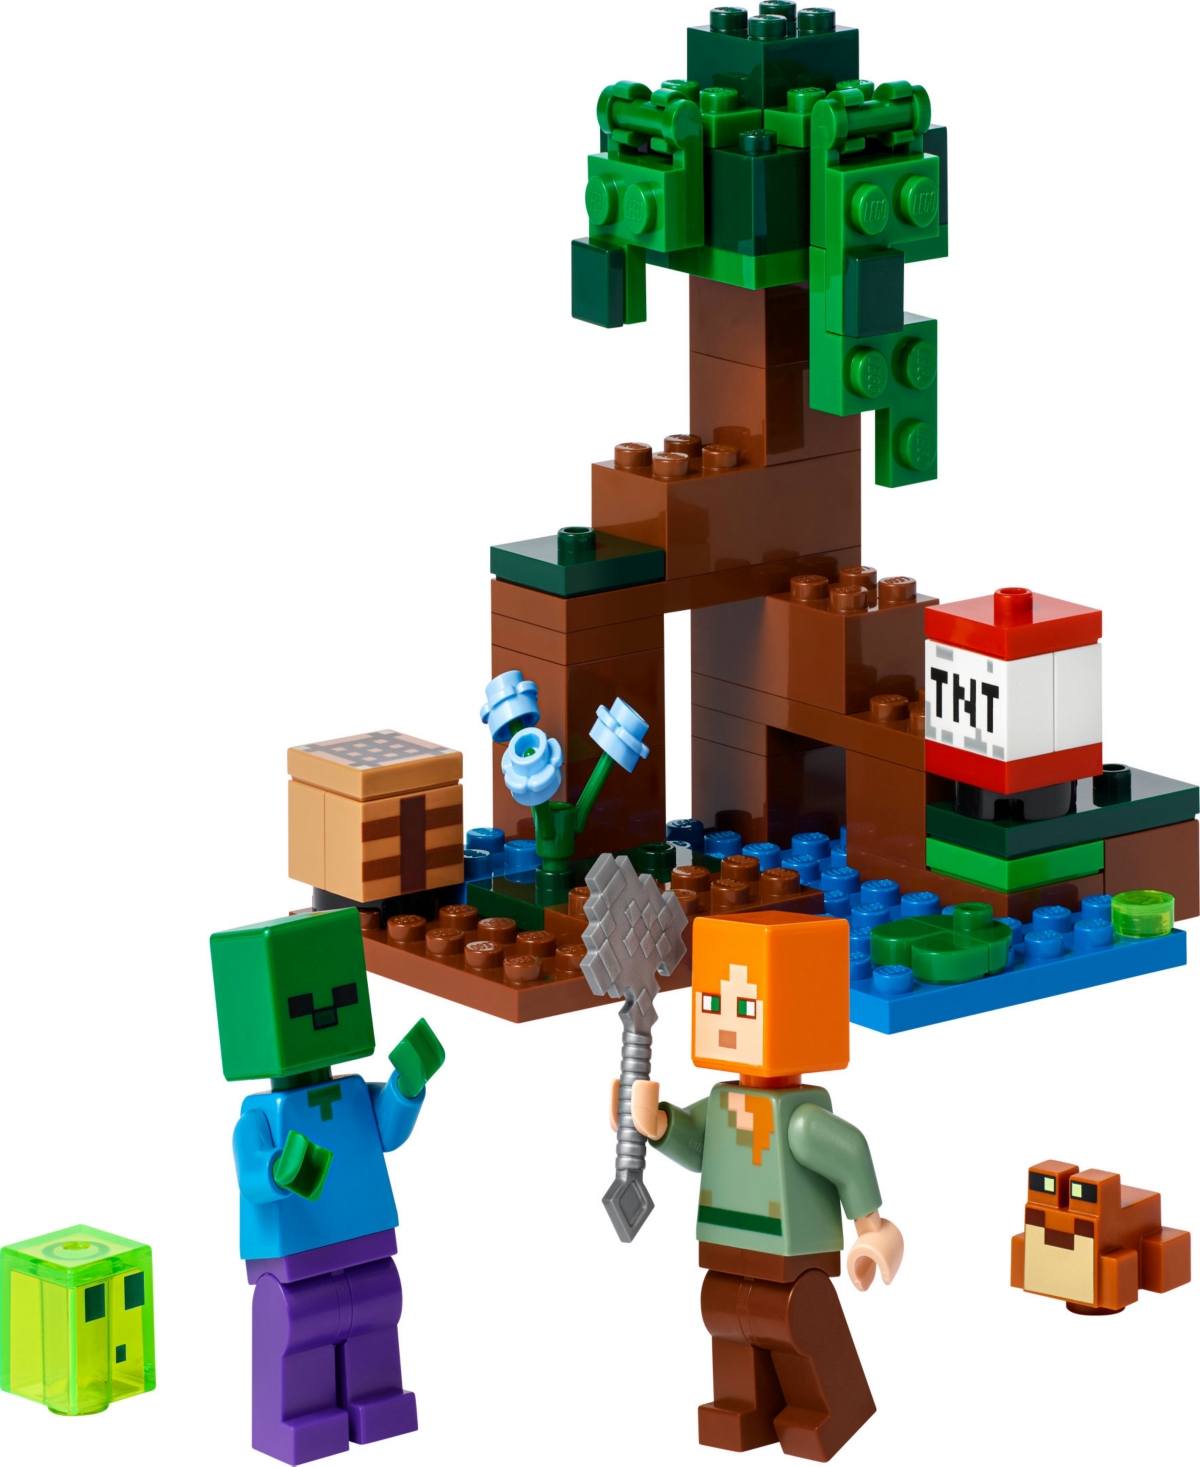 Shop Lego Minecraft The Swamp Adventure 21240 Toy Building Set With Alex, Zombie, Slime Block And Frog Figures In Multicolor